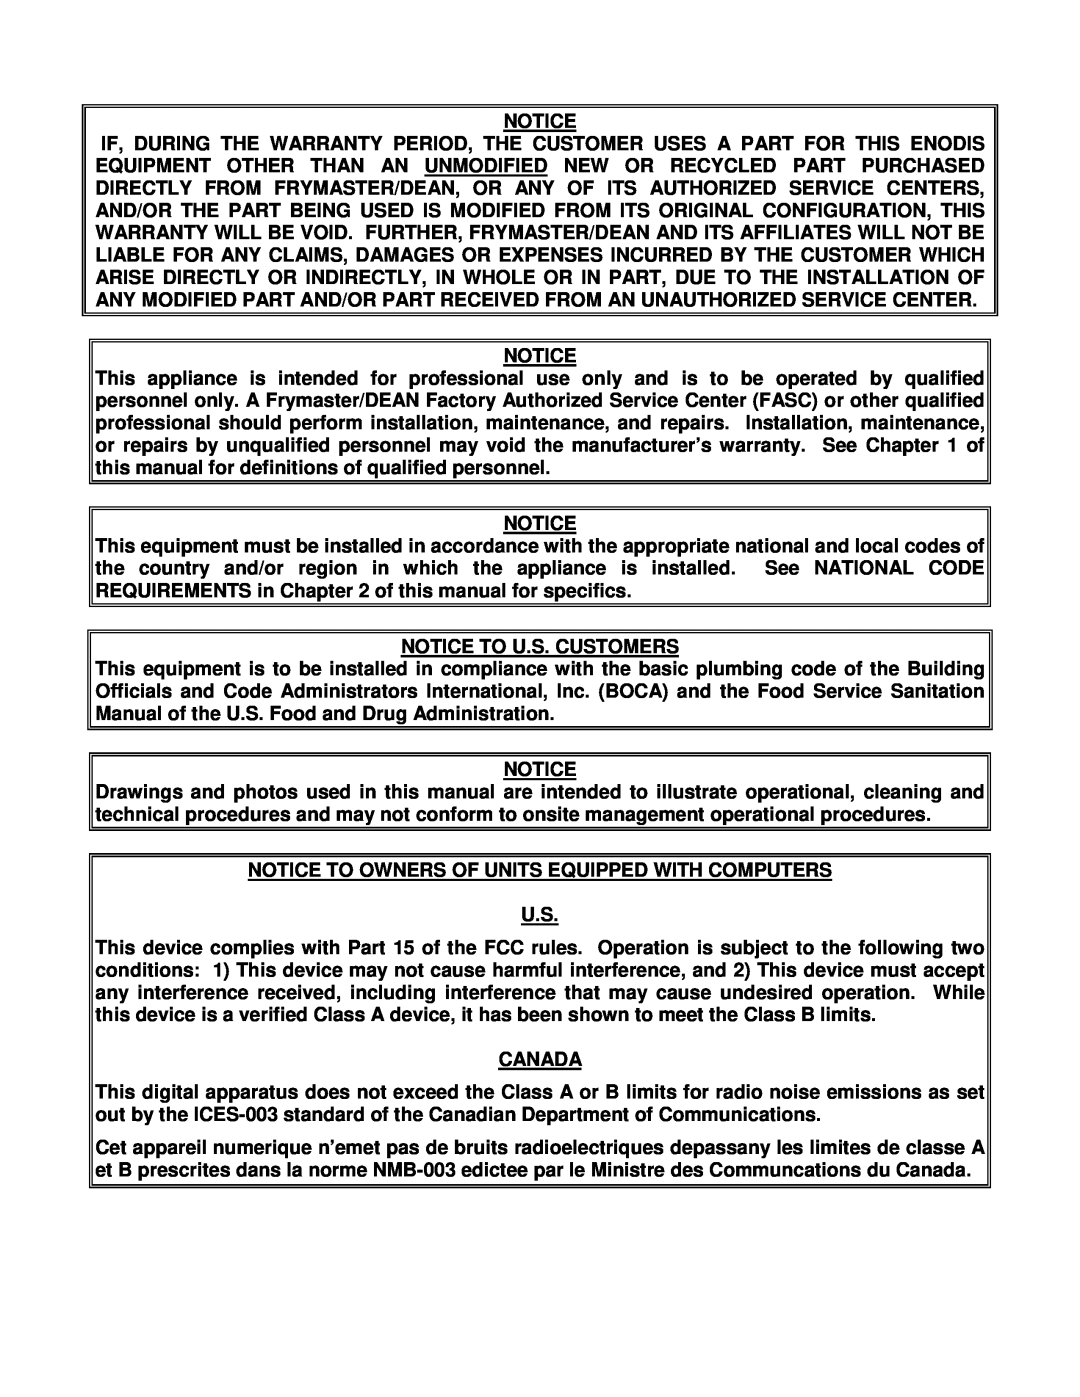 Frymaster H50 Series manual Notice To U.S. Customers, Notice To Owners Of Units Equipped With Computers, Canada 